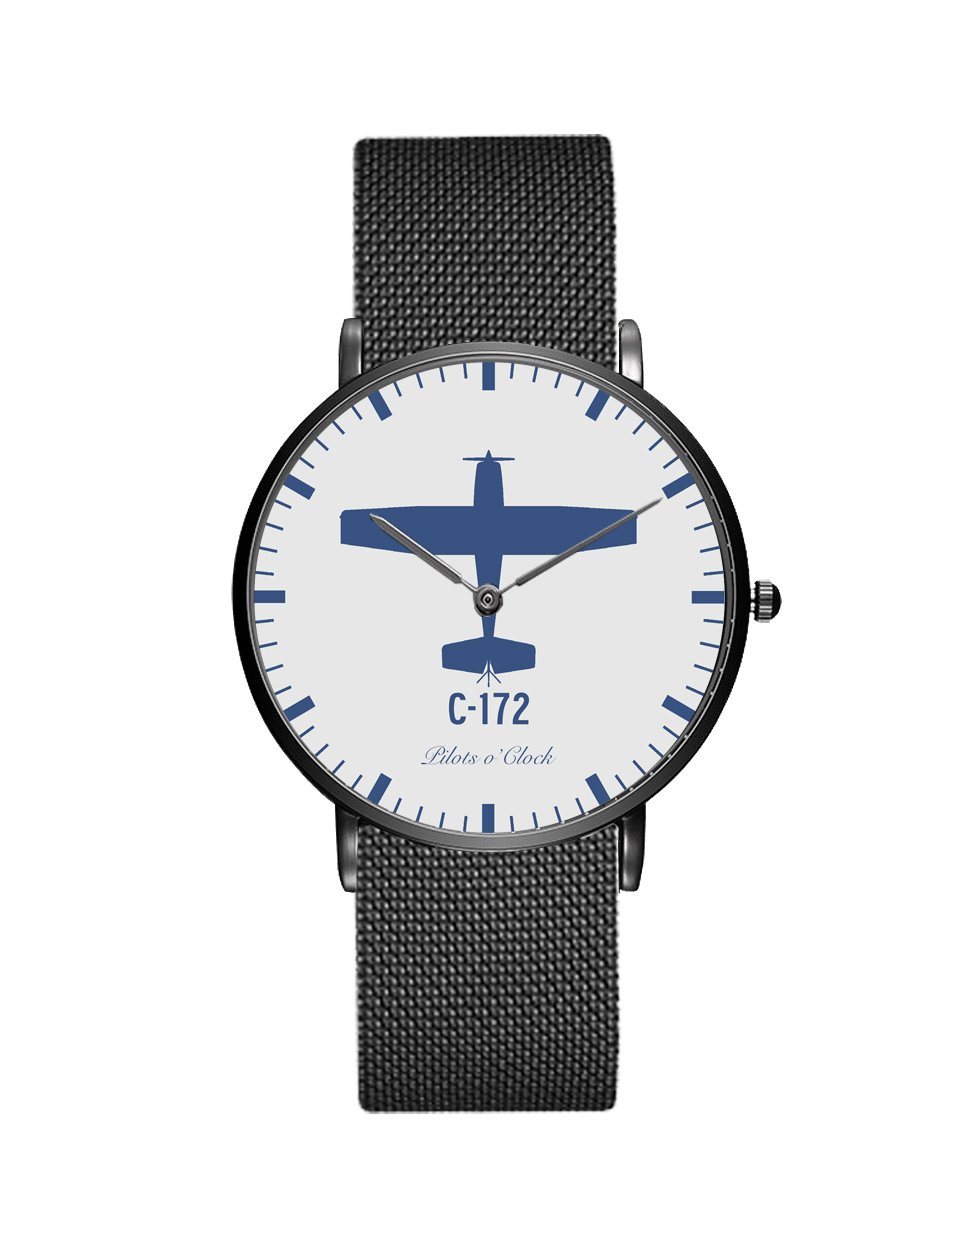 Cessna 172 Stainless Steel Strap Watches Pilot Eyes Store Black & Stainless Steel Strap 